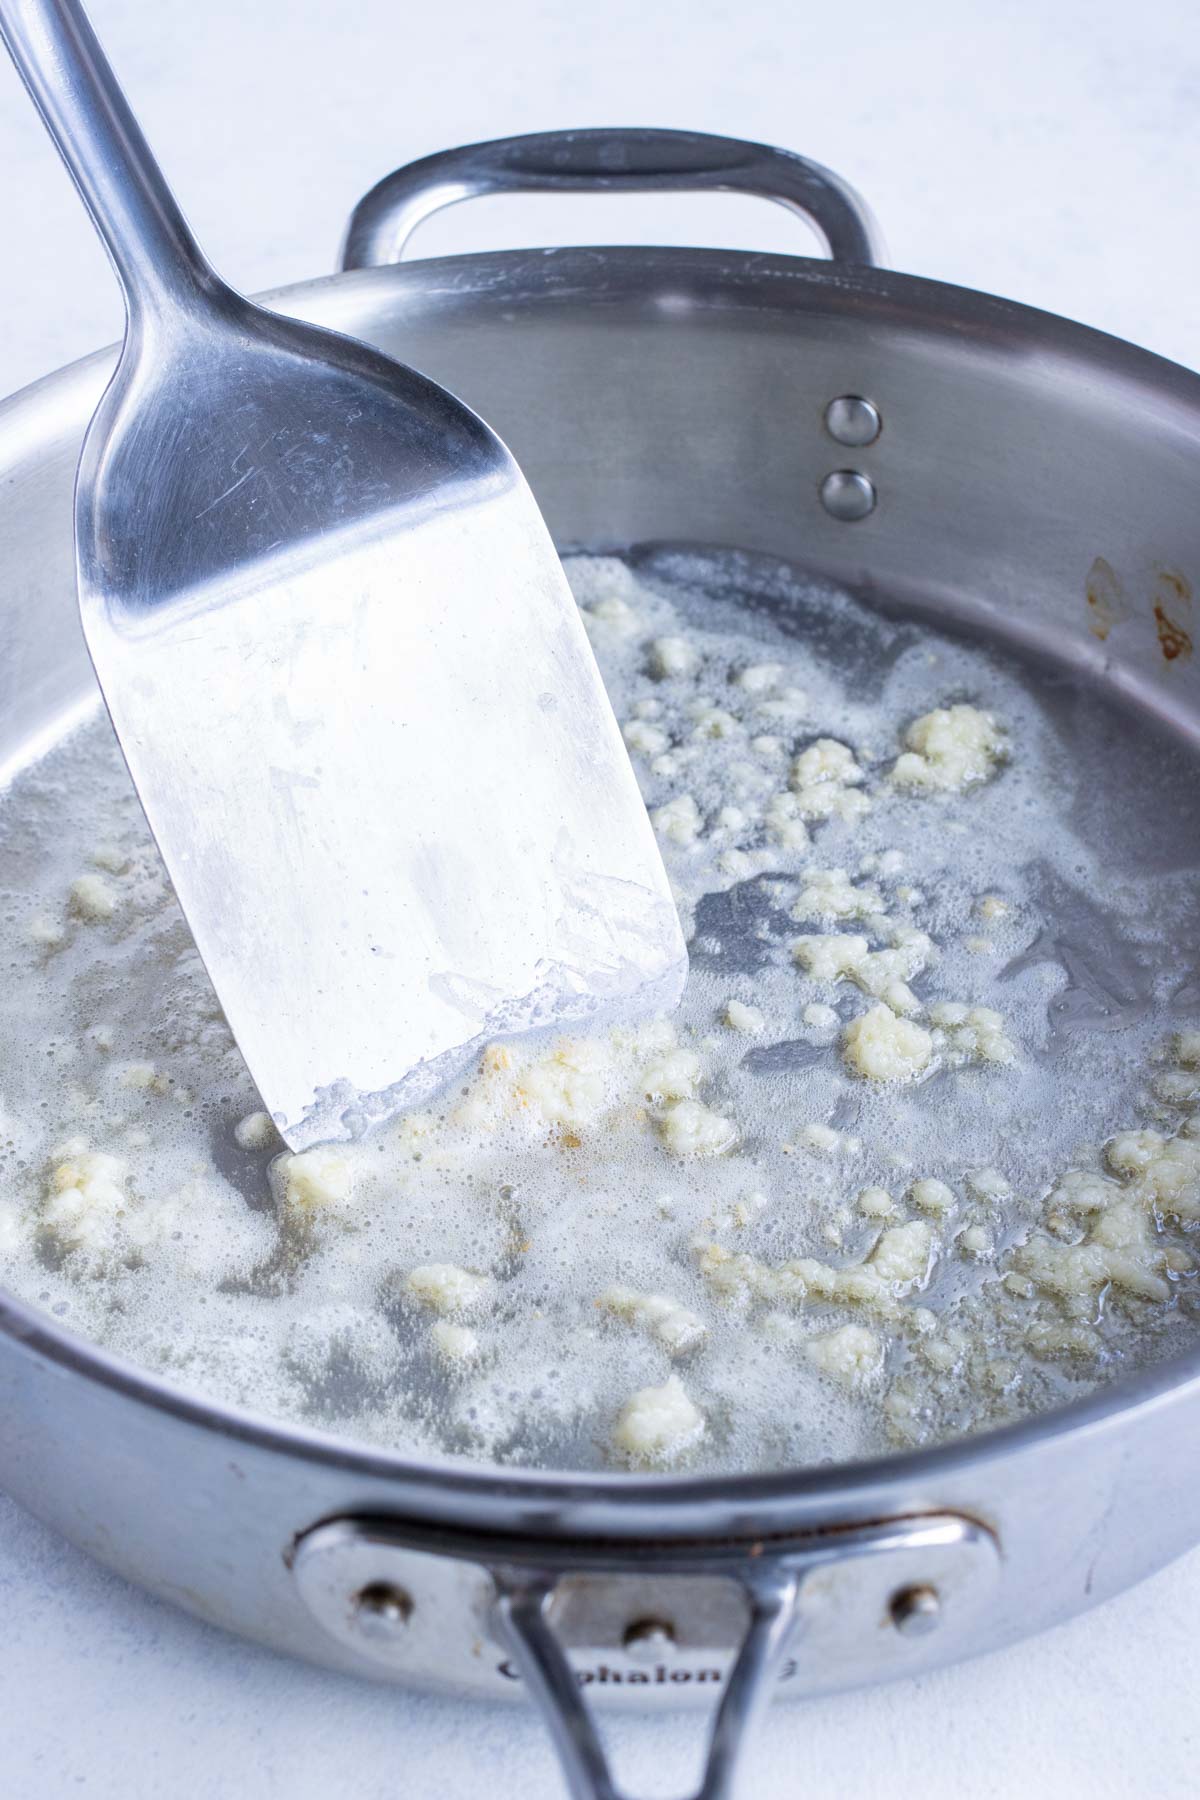 Butter is melted on the stove with minced garlic.